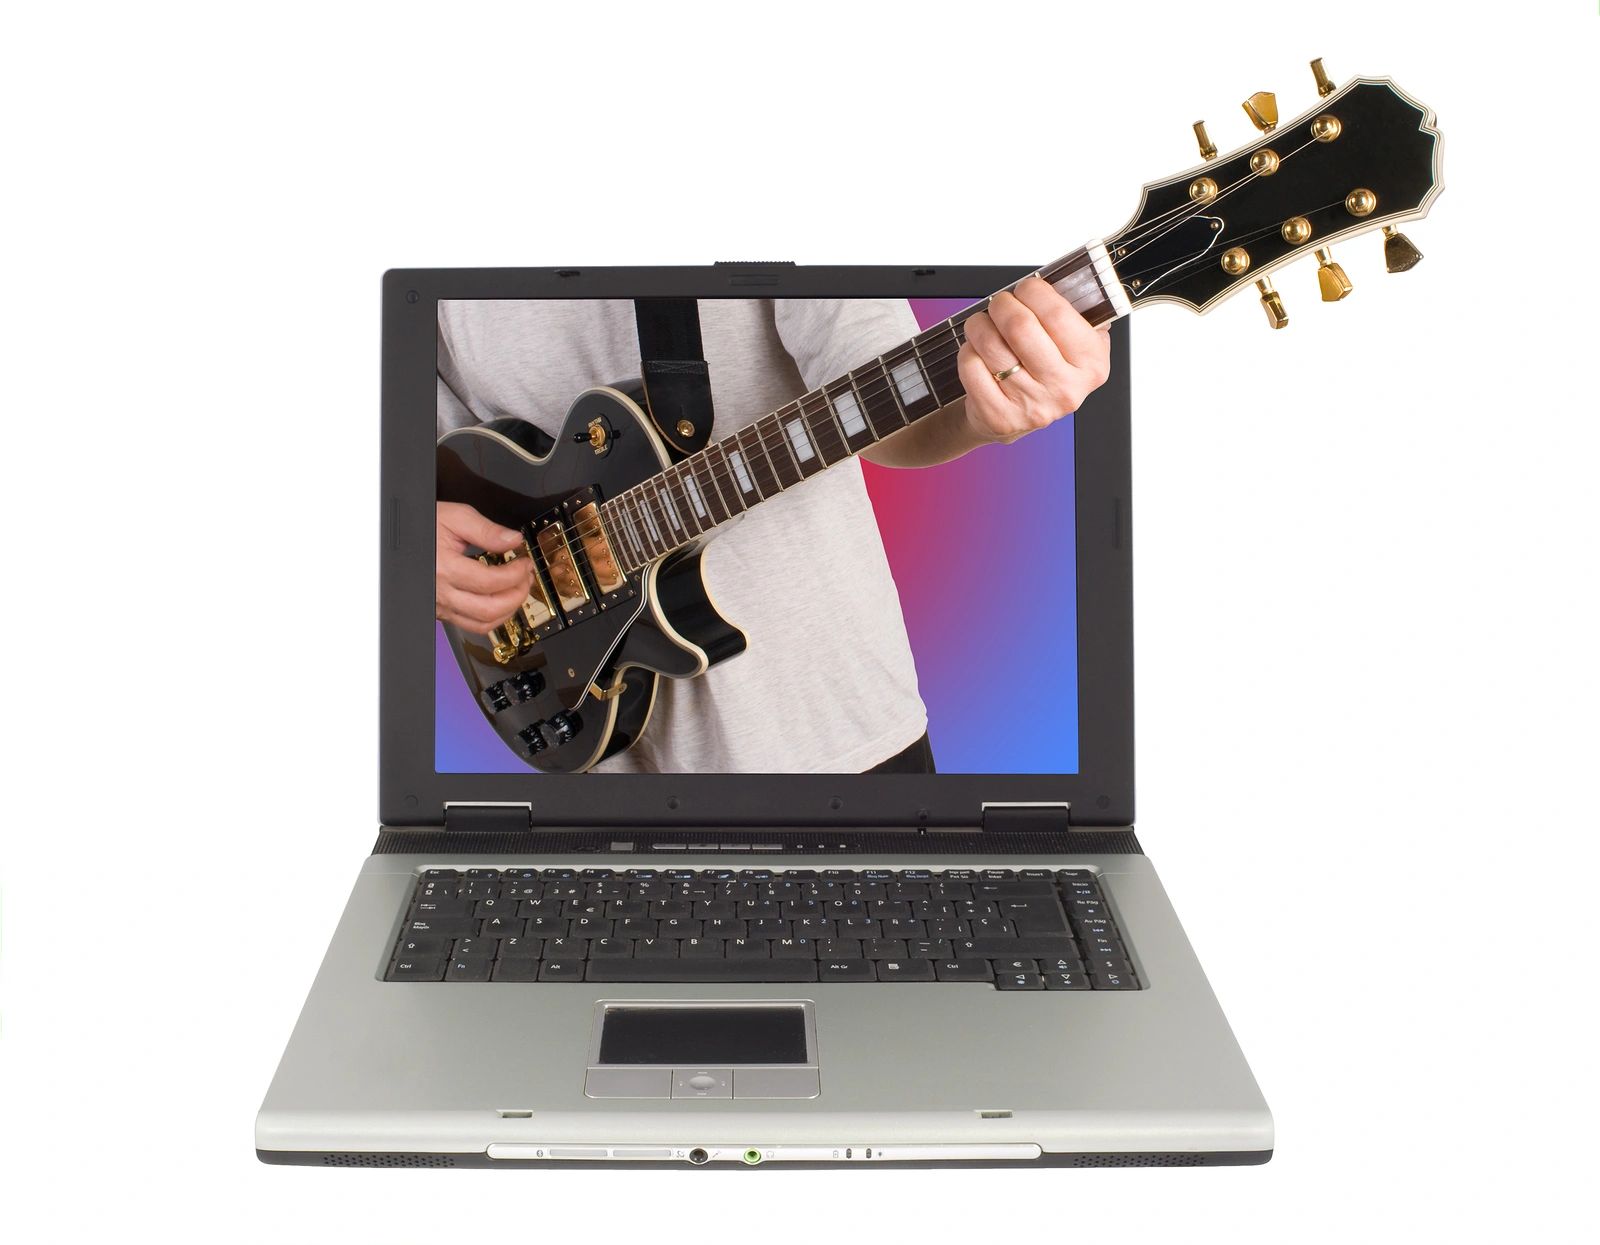 Online Guitar Lessons
Indy Guitar Lessons